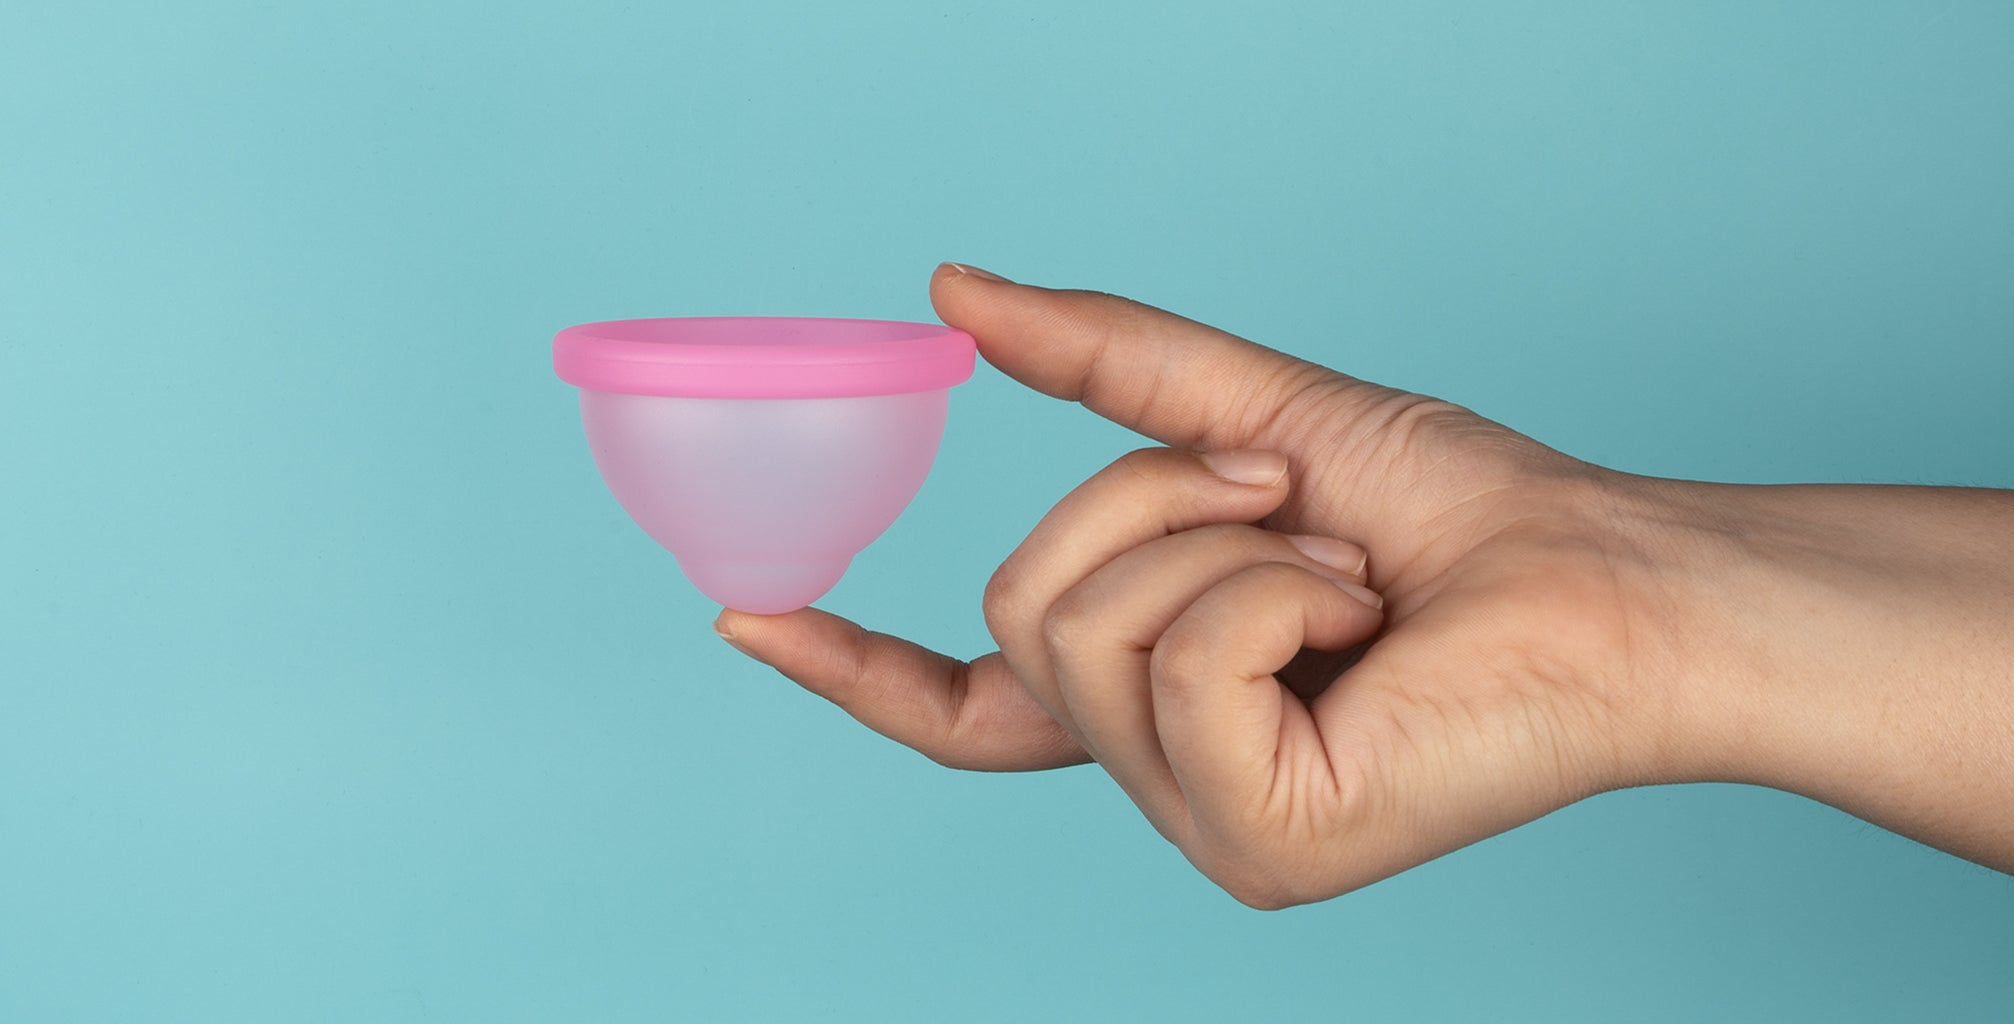 Your Guide To Using Reusable Menstrual Discs